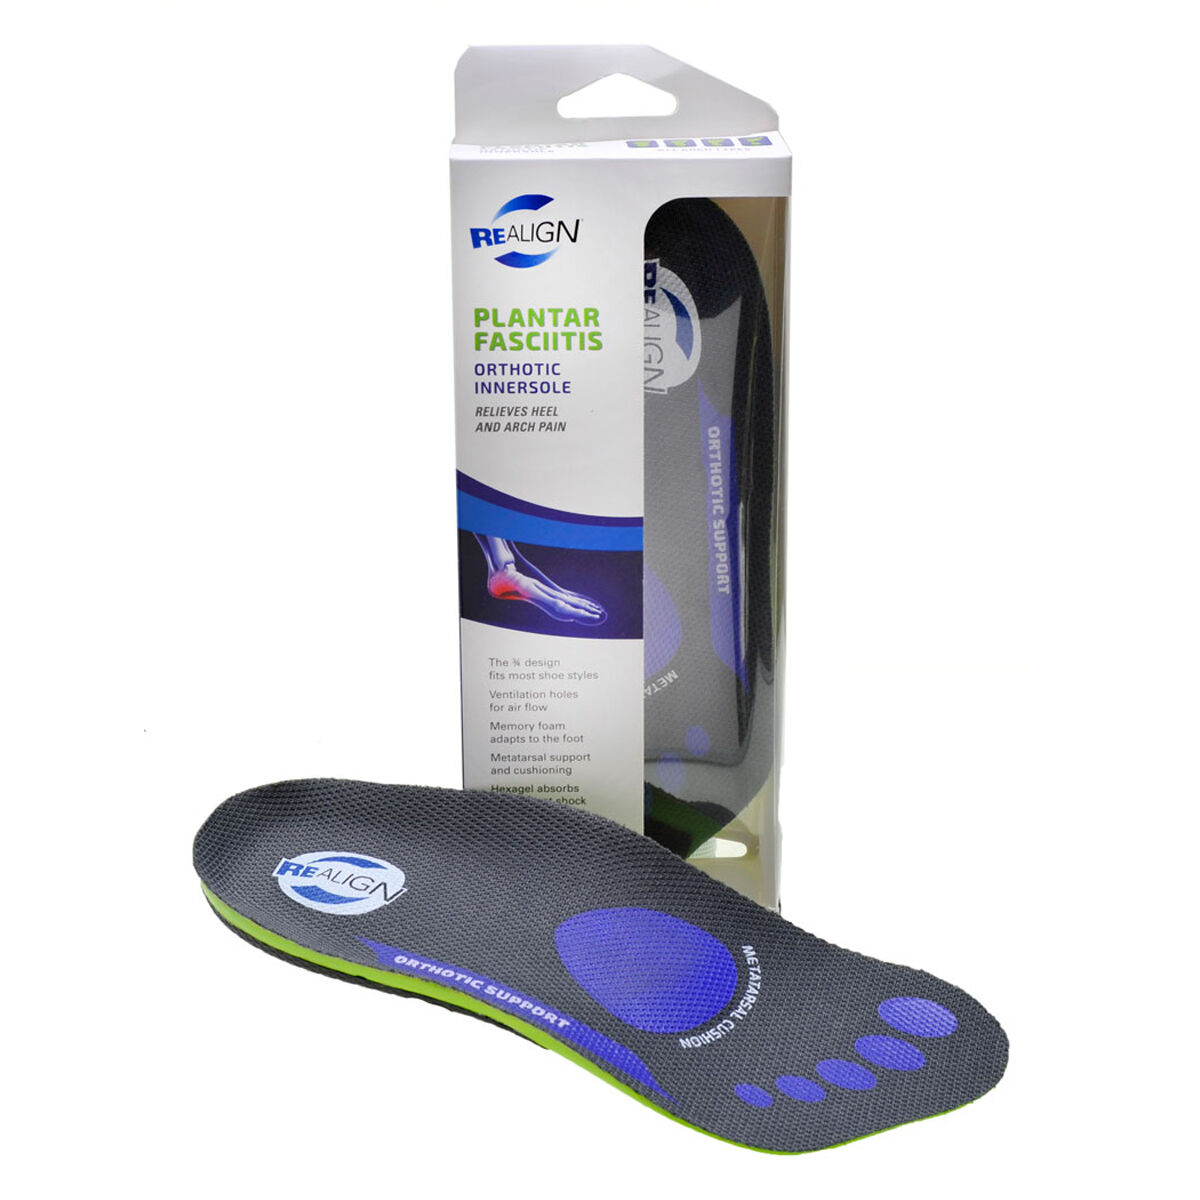 Limited Edition - Realign Plantar Fasciitis Orthotic Innersole Sale At ...